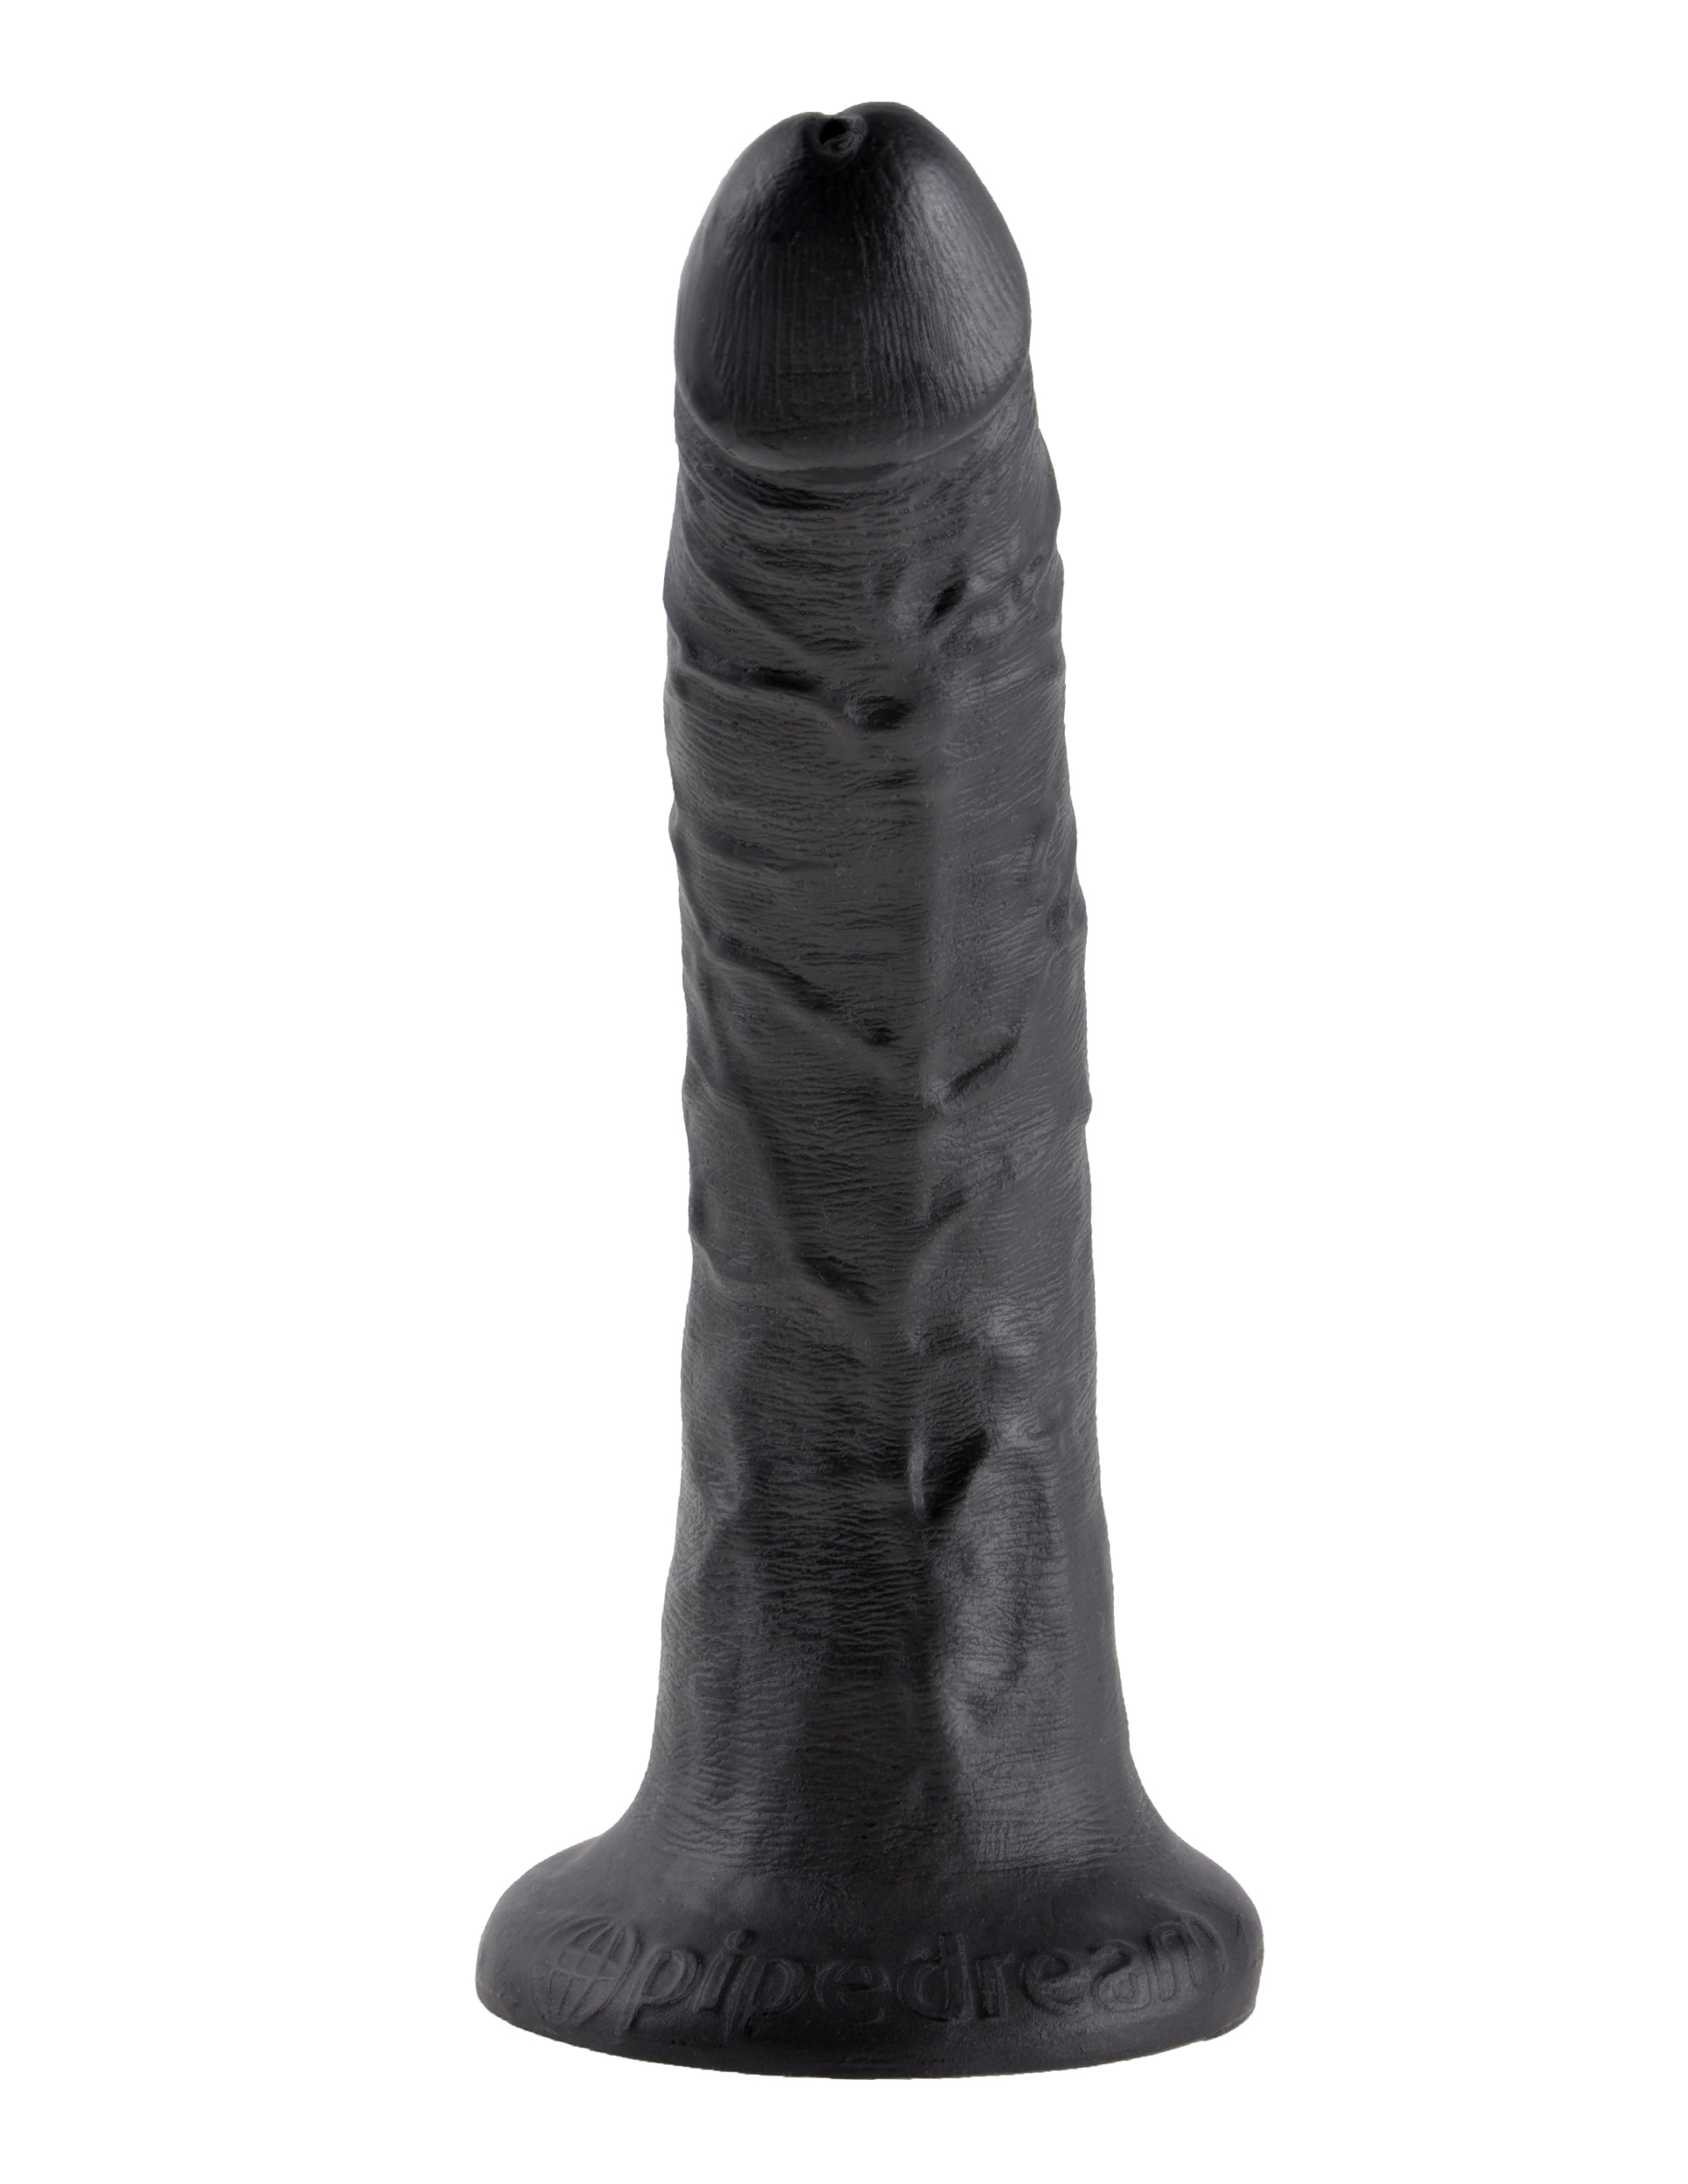 KING COCK 7 IN COCK BLACK - Click Image to Close